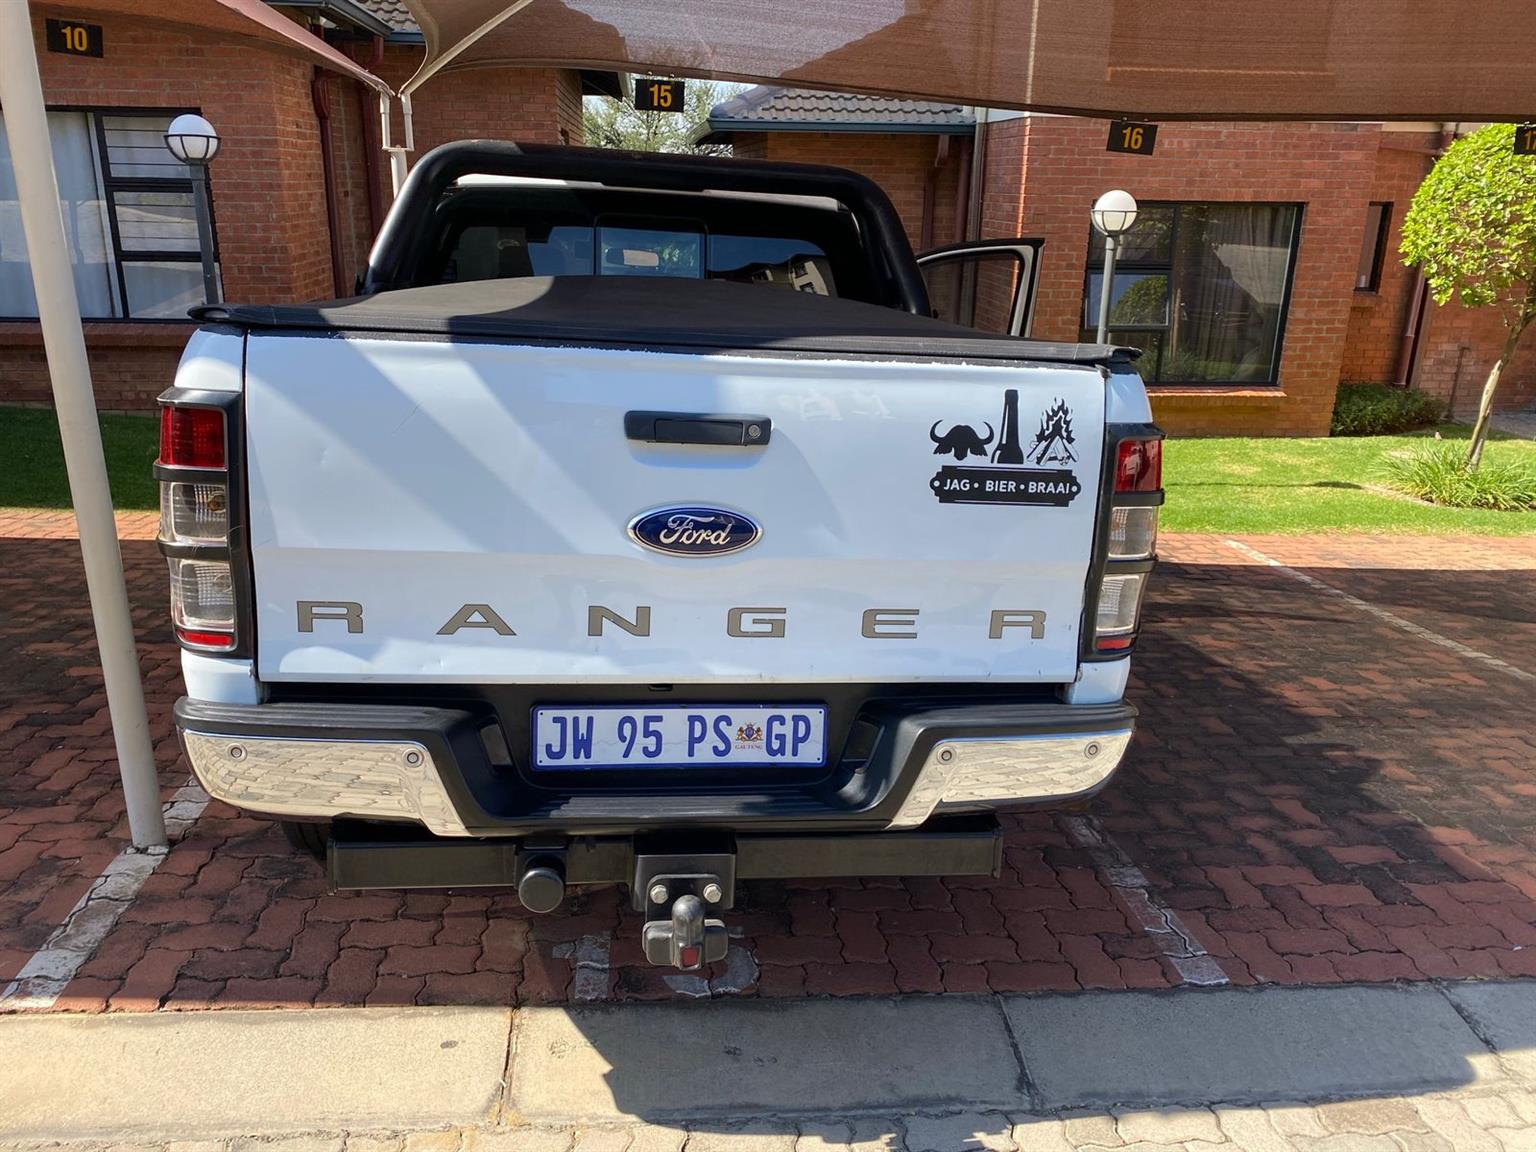 4x2 Ford Ranger in Crisp condition up for grabs.